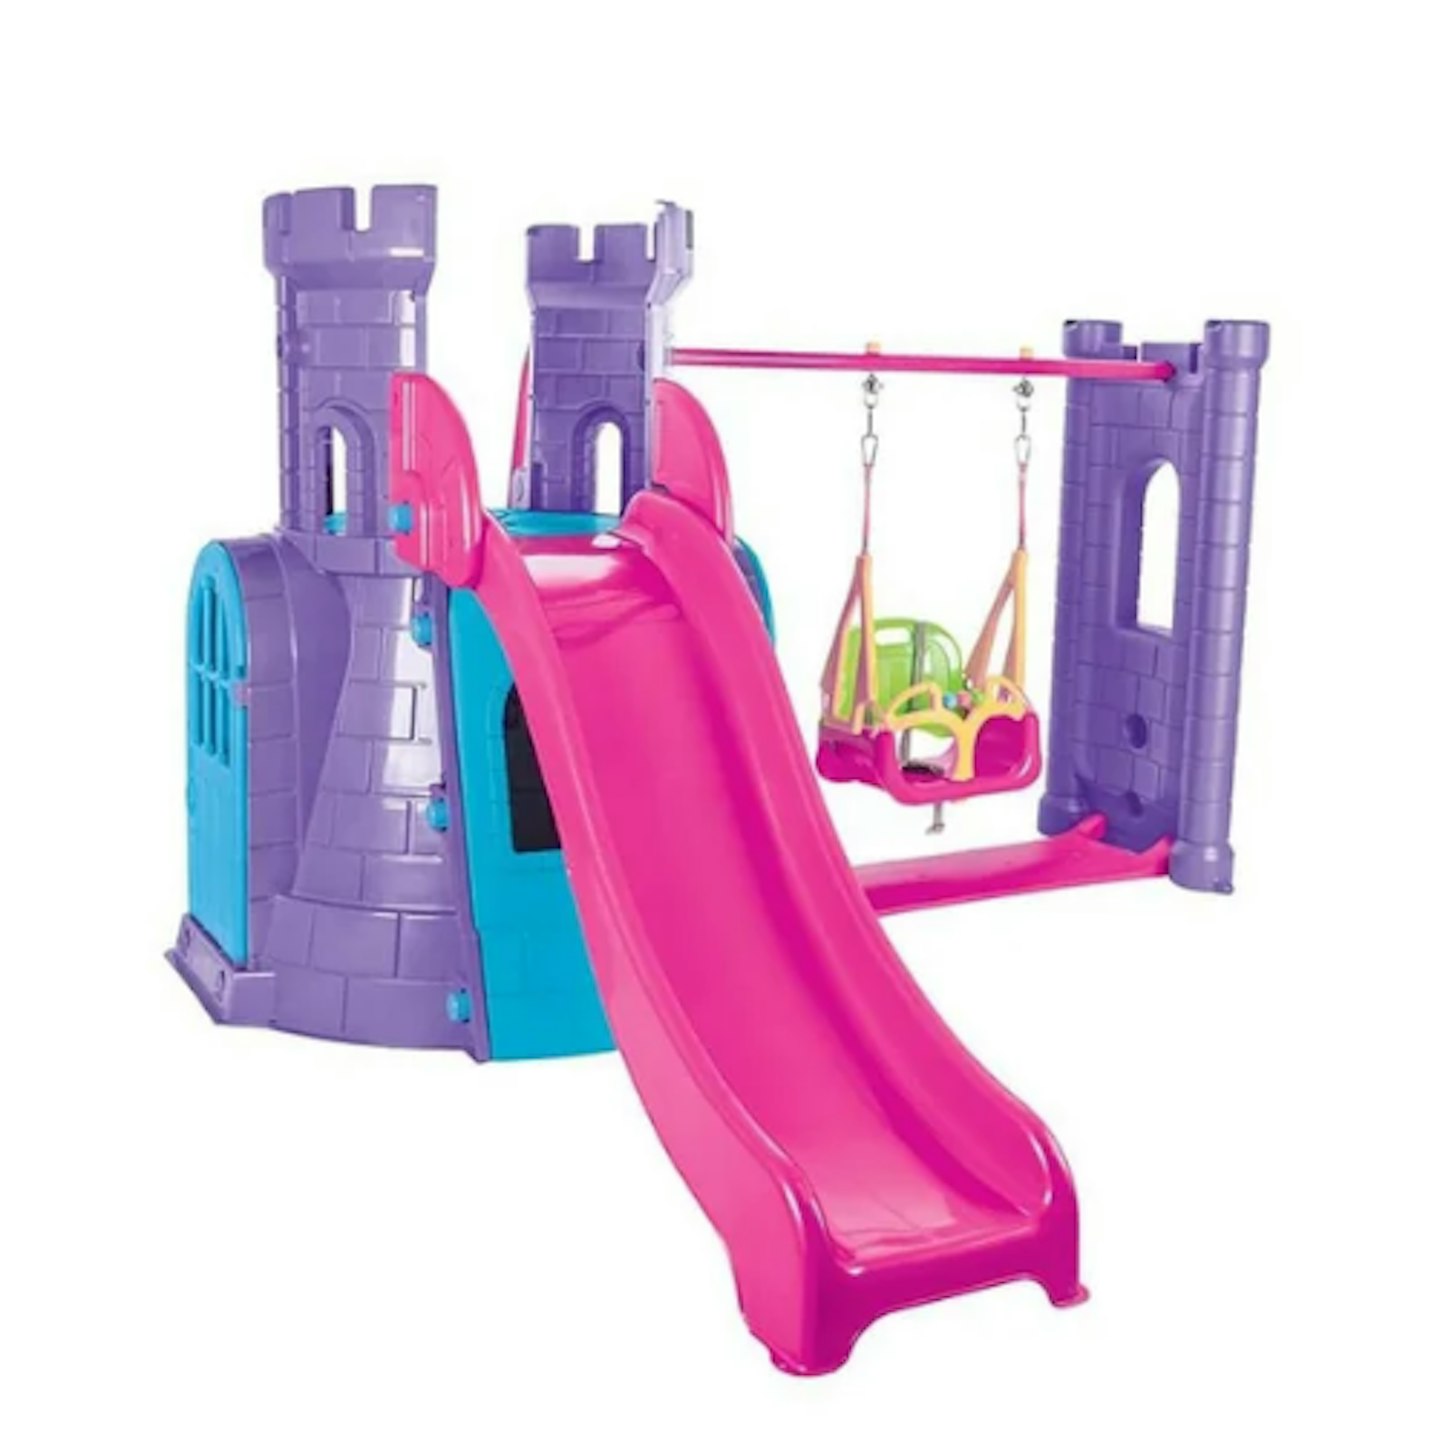 Freeport Park Childrenu0026#039;s Castle In Abs With Slide And Swing